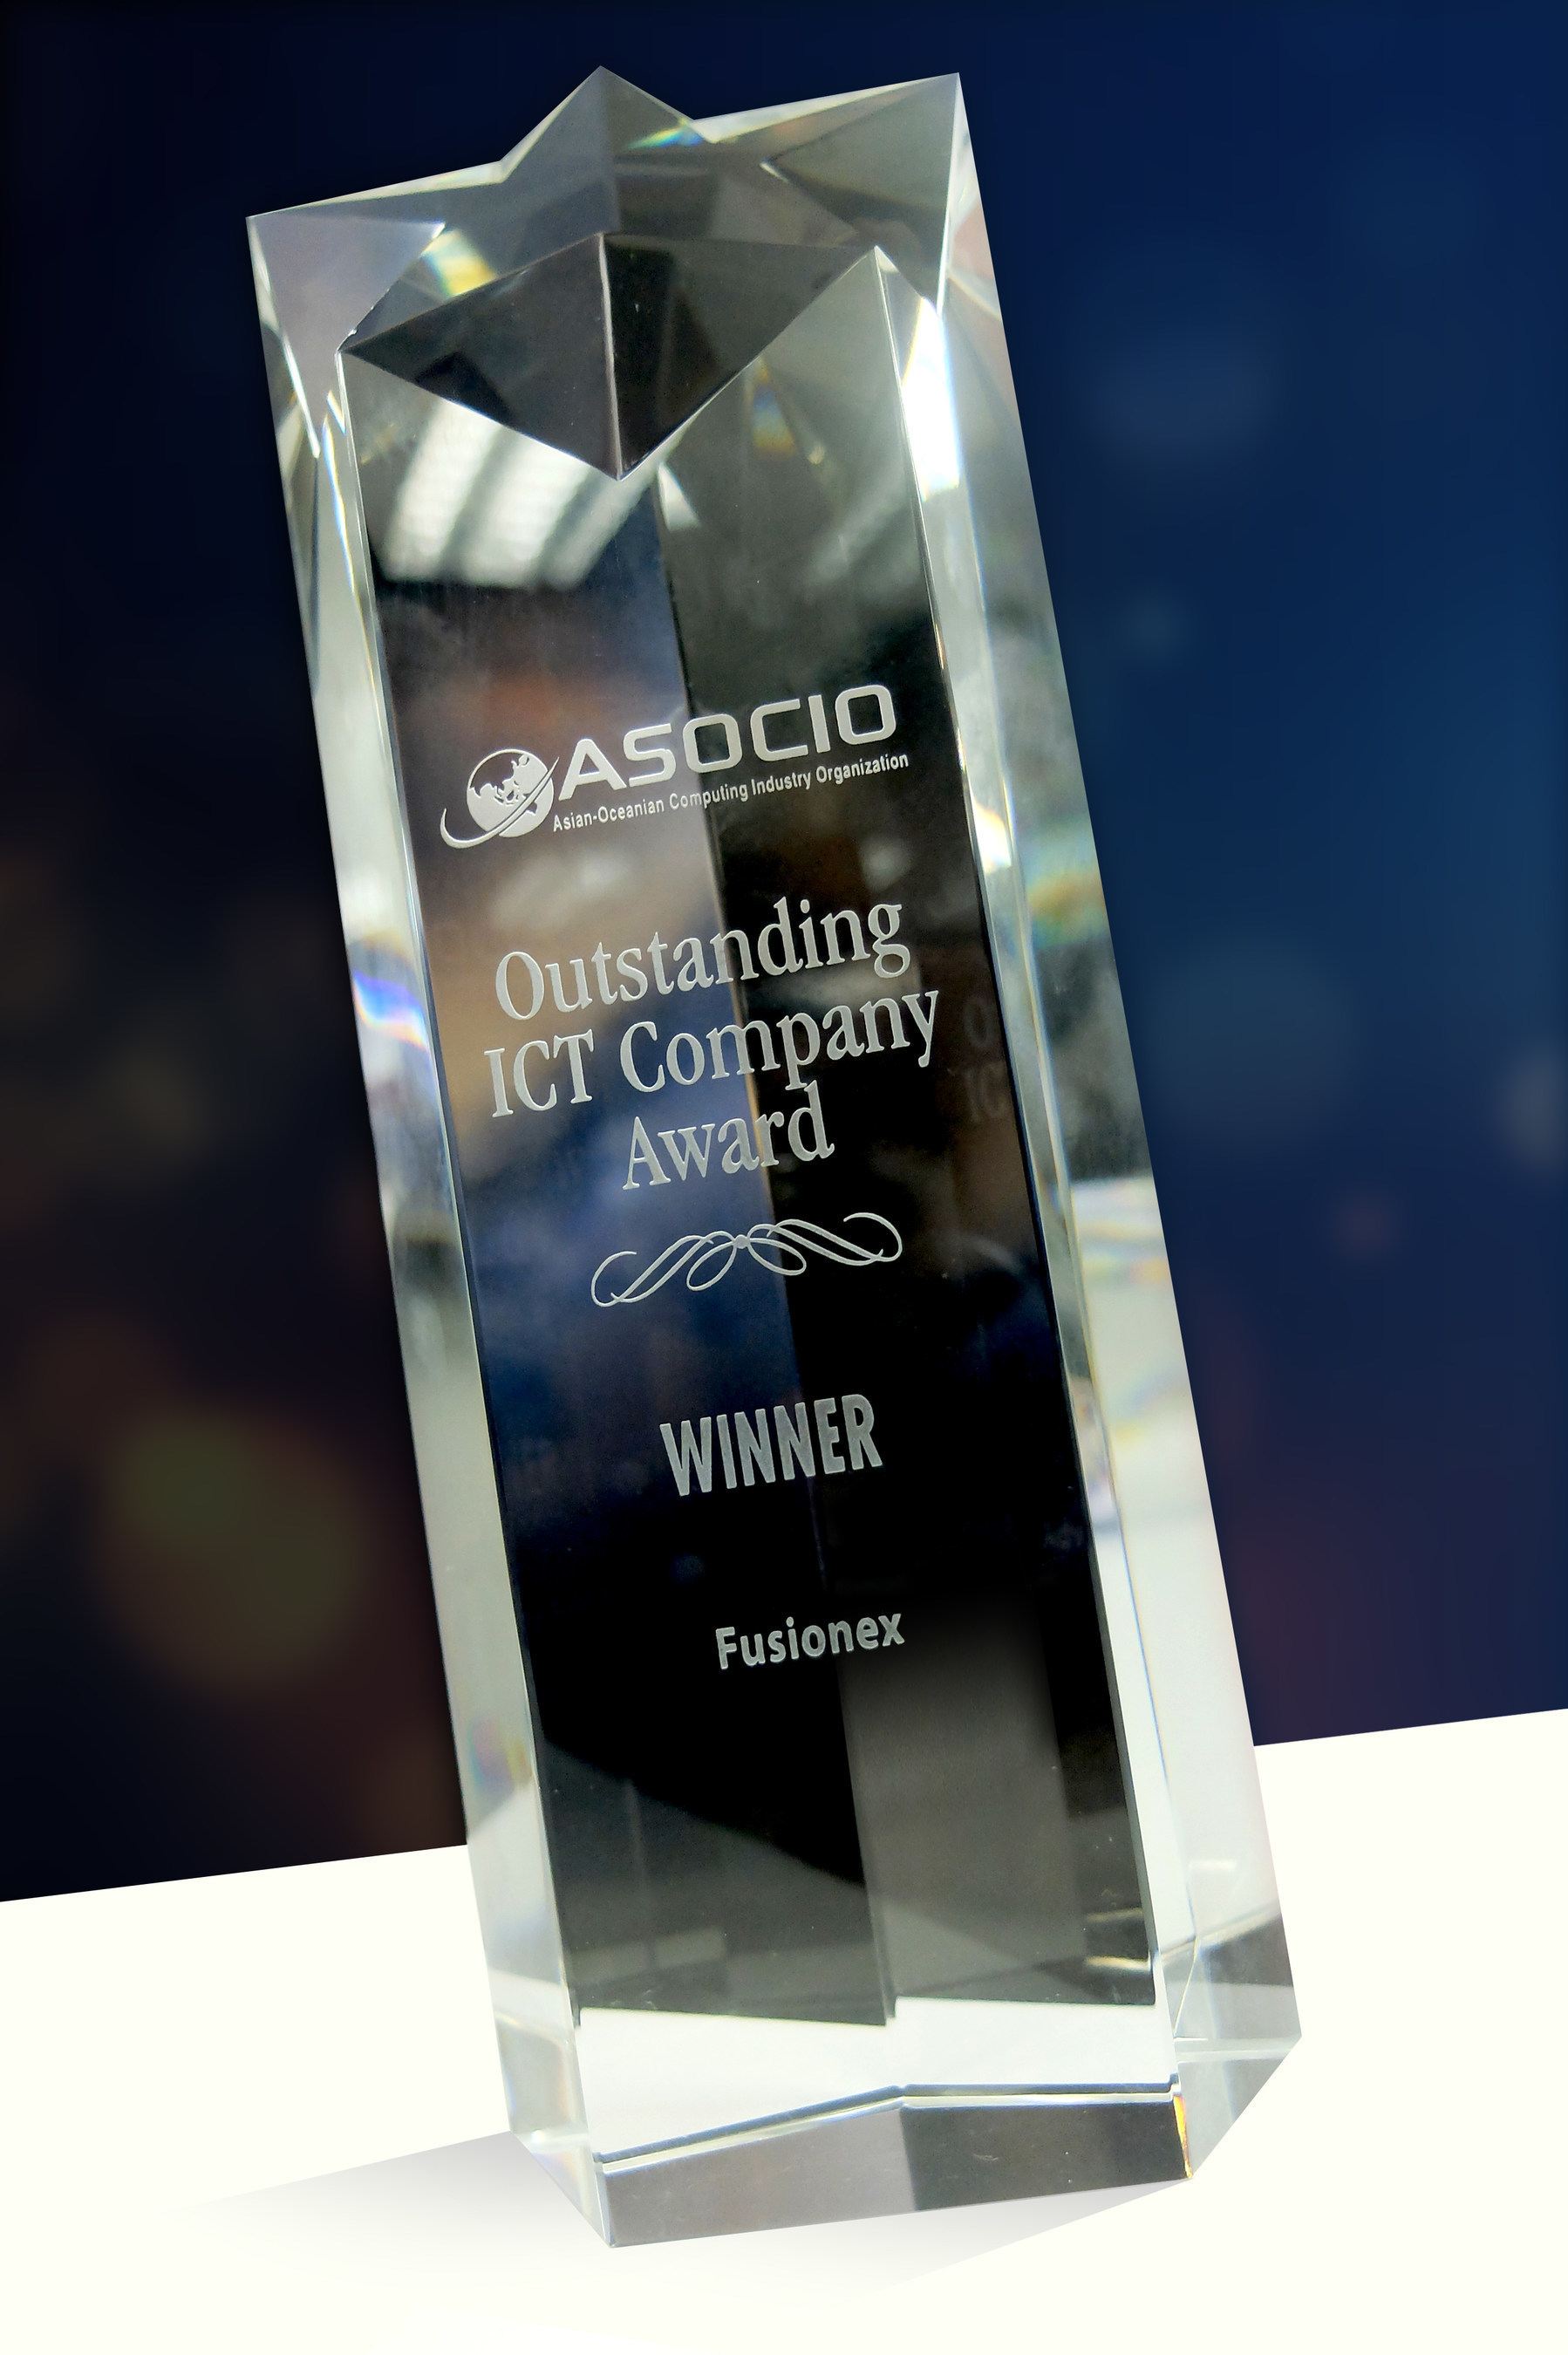 Fusionex Honoured as Most Outstanding ICT Company in Asia-Oceania (ASOCIO)